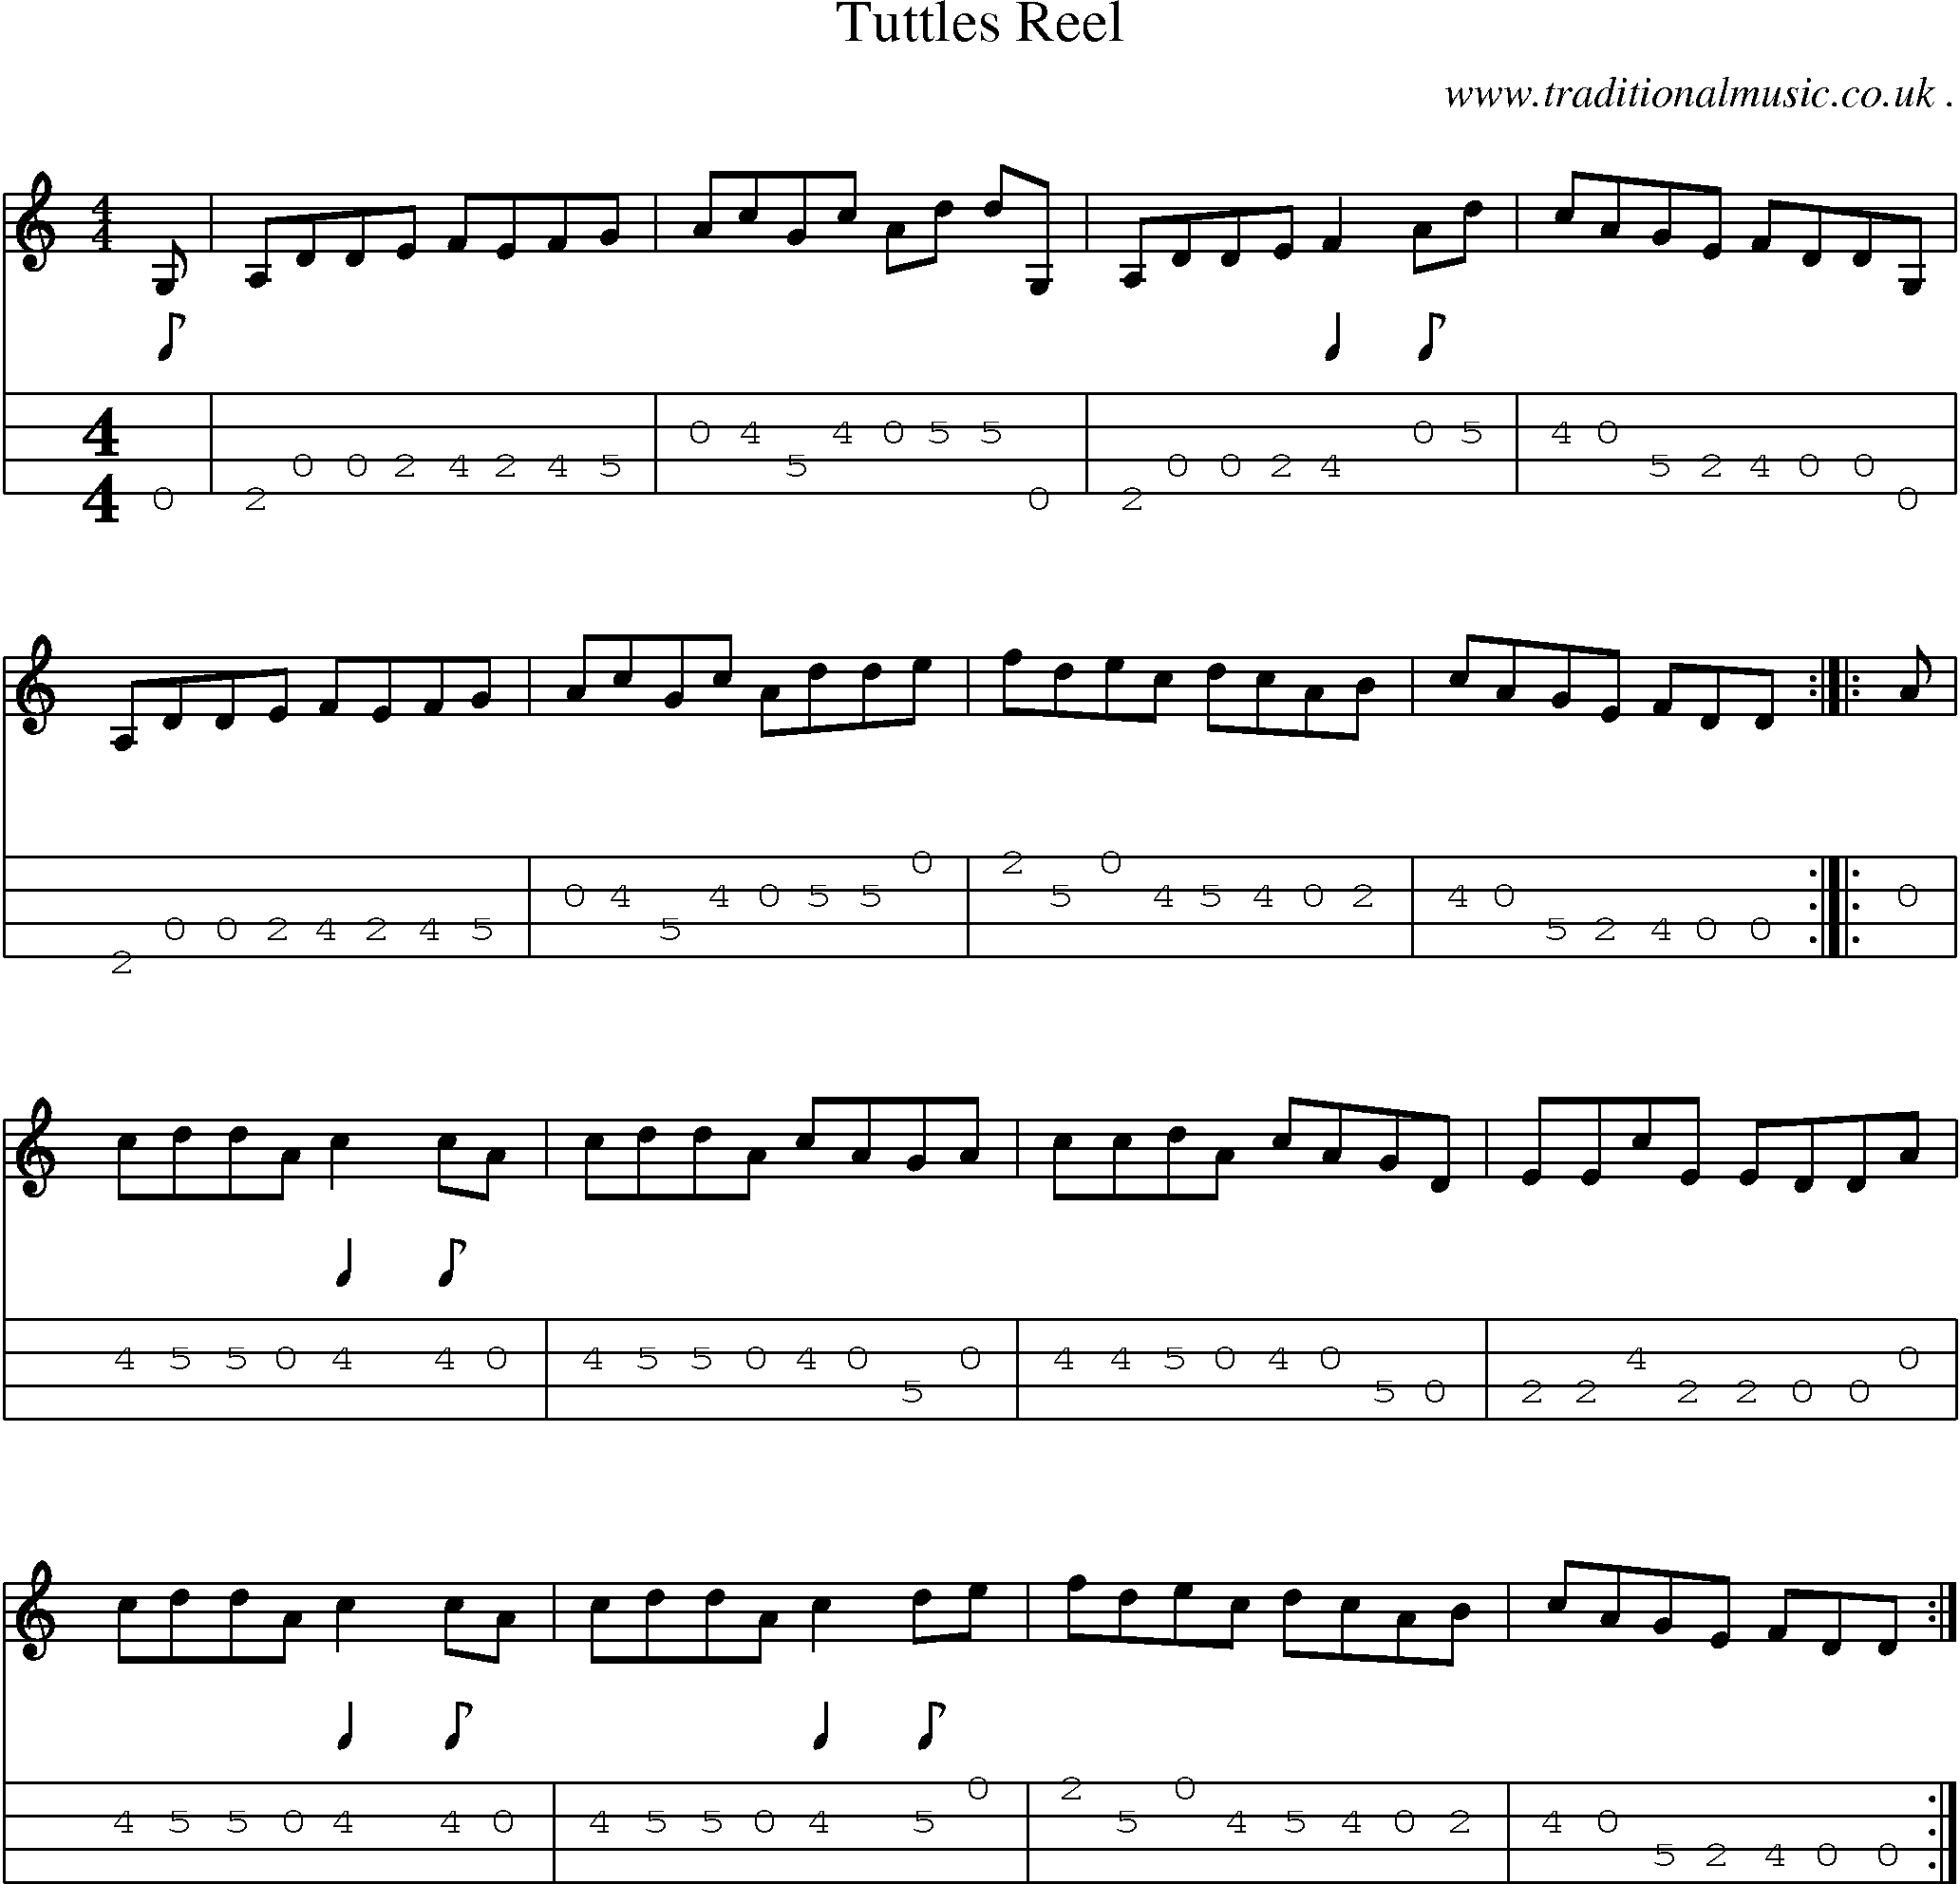 Sheet-Music and Mandolin Tabs for Tuttles Reel